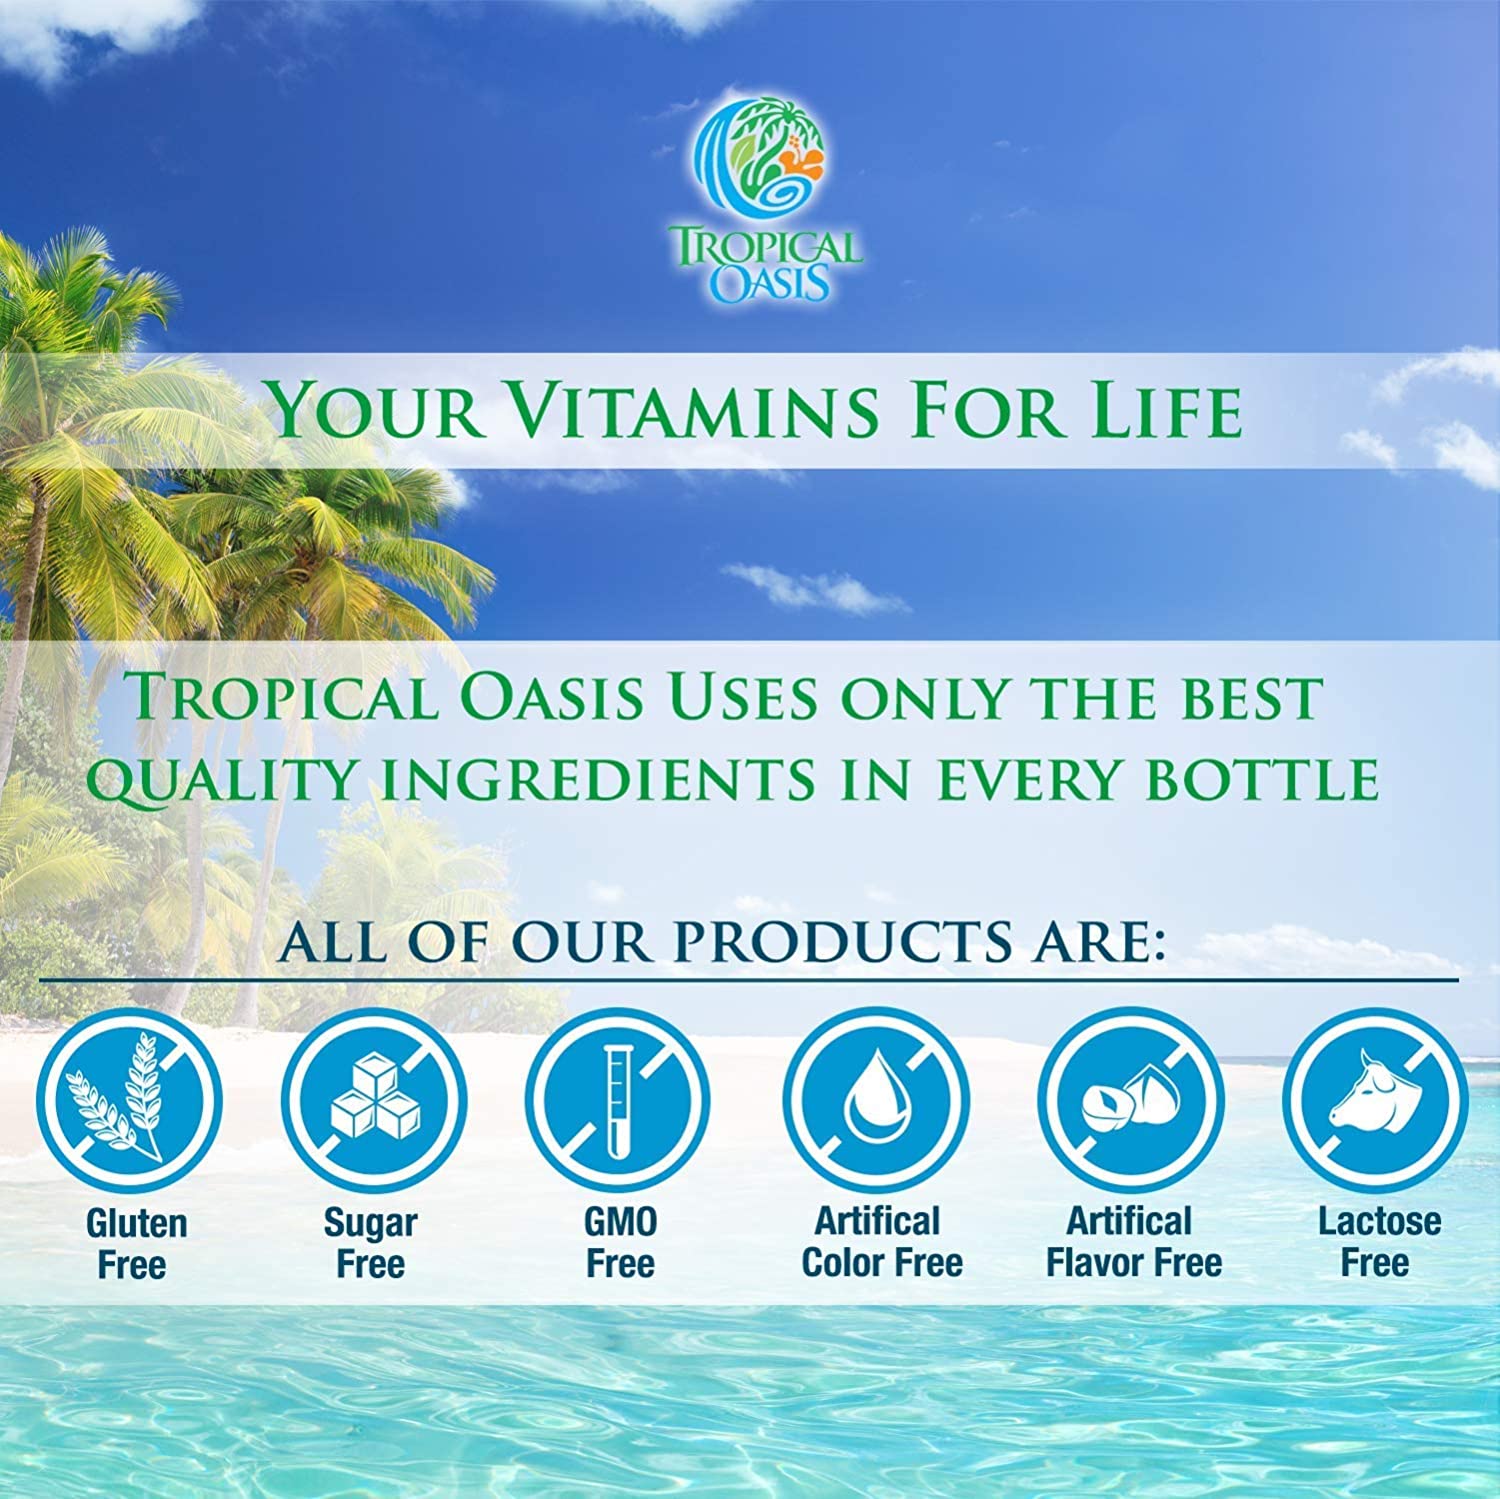 Tropical Oasis Brain Power - Liquid Supplement that Promotes Mental Clarity & Increased Focus